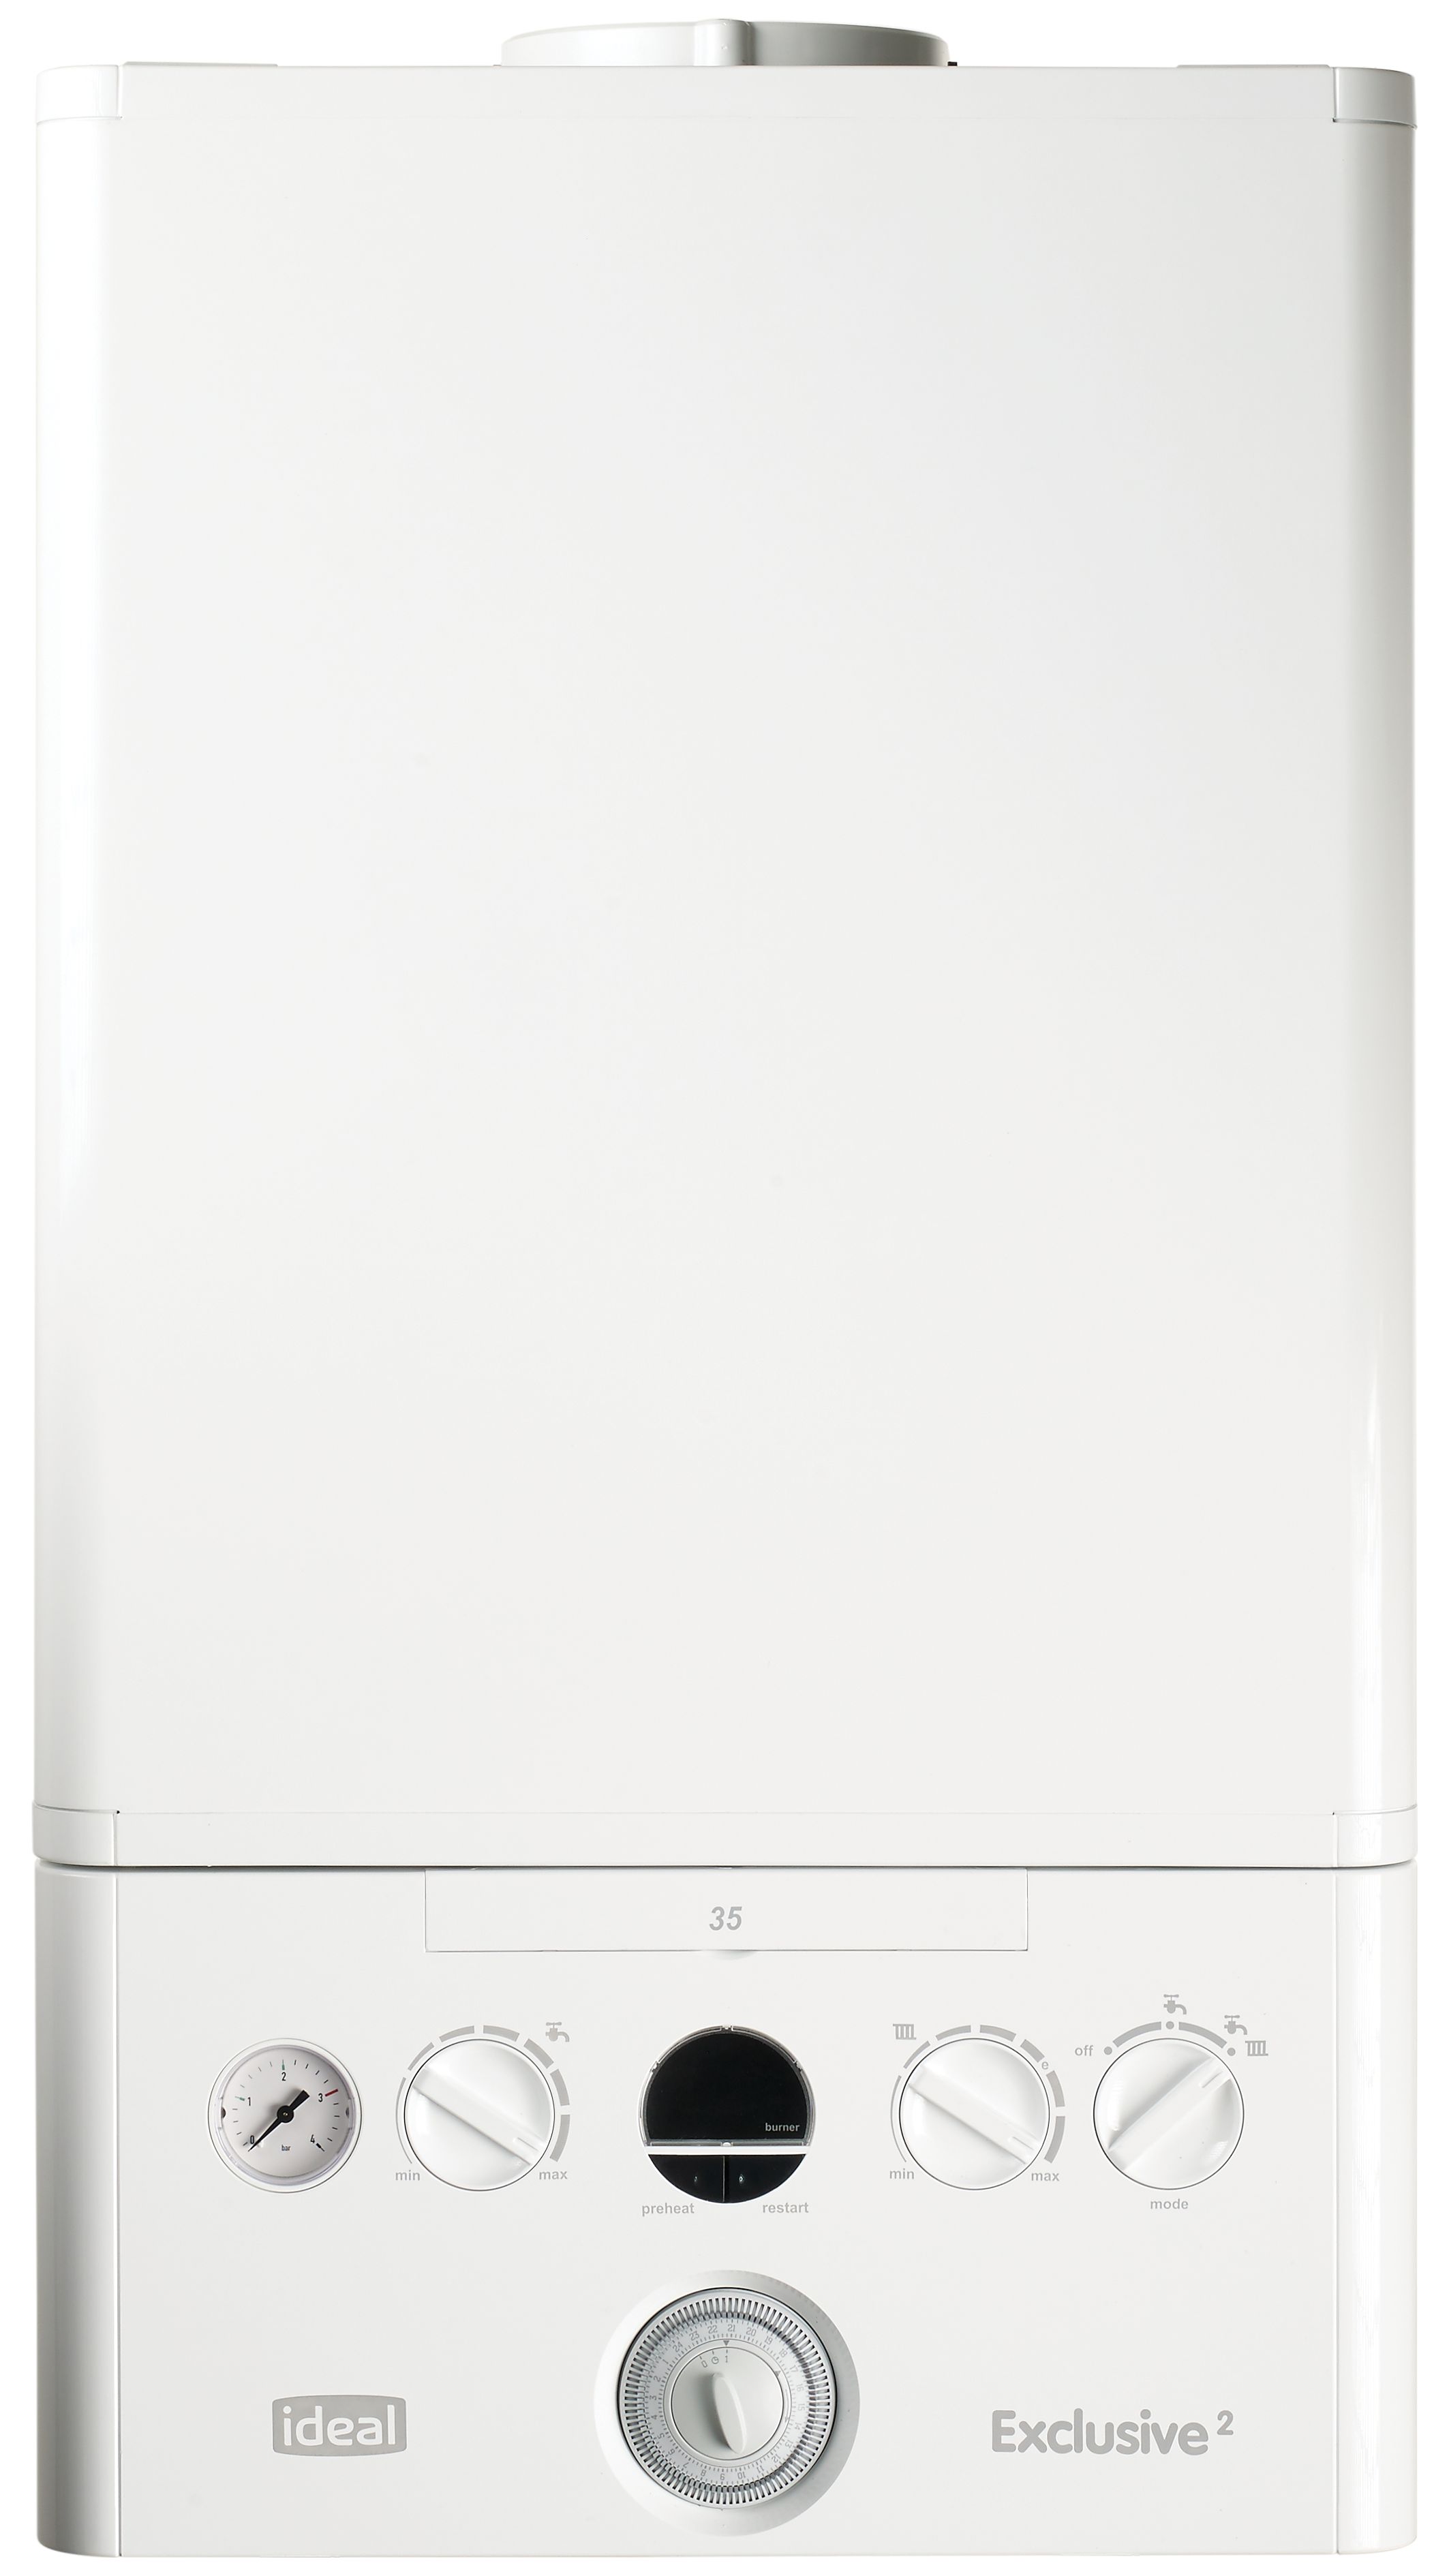 Image of Ideal Exclusive 2 Combi Boiler Only - 30kW